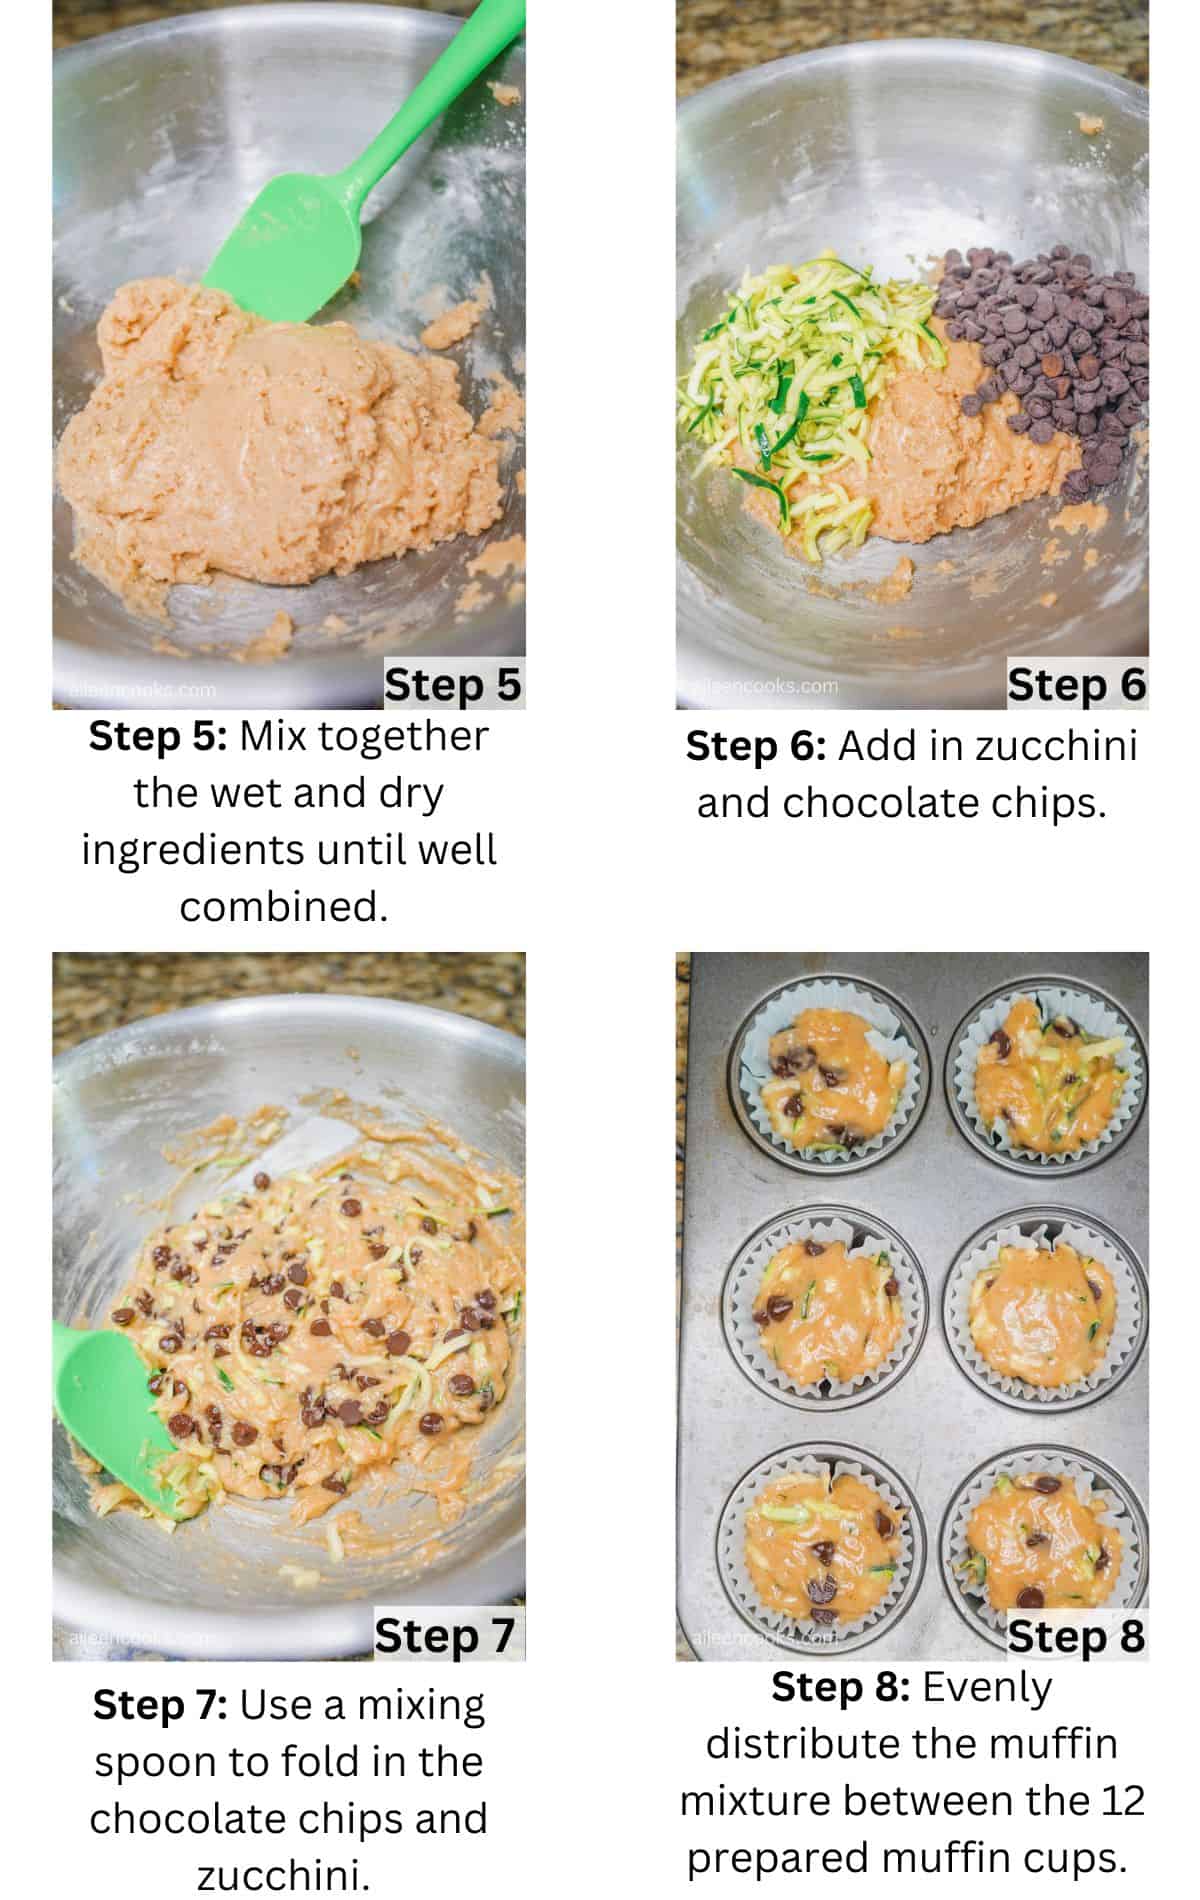 Collage photo of steps 5 through 8 for making chocolate chip zucchini muffins.